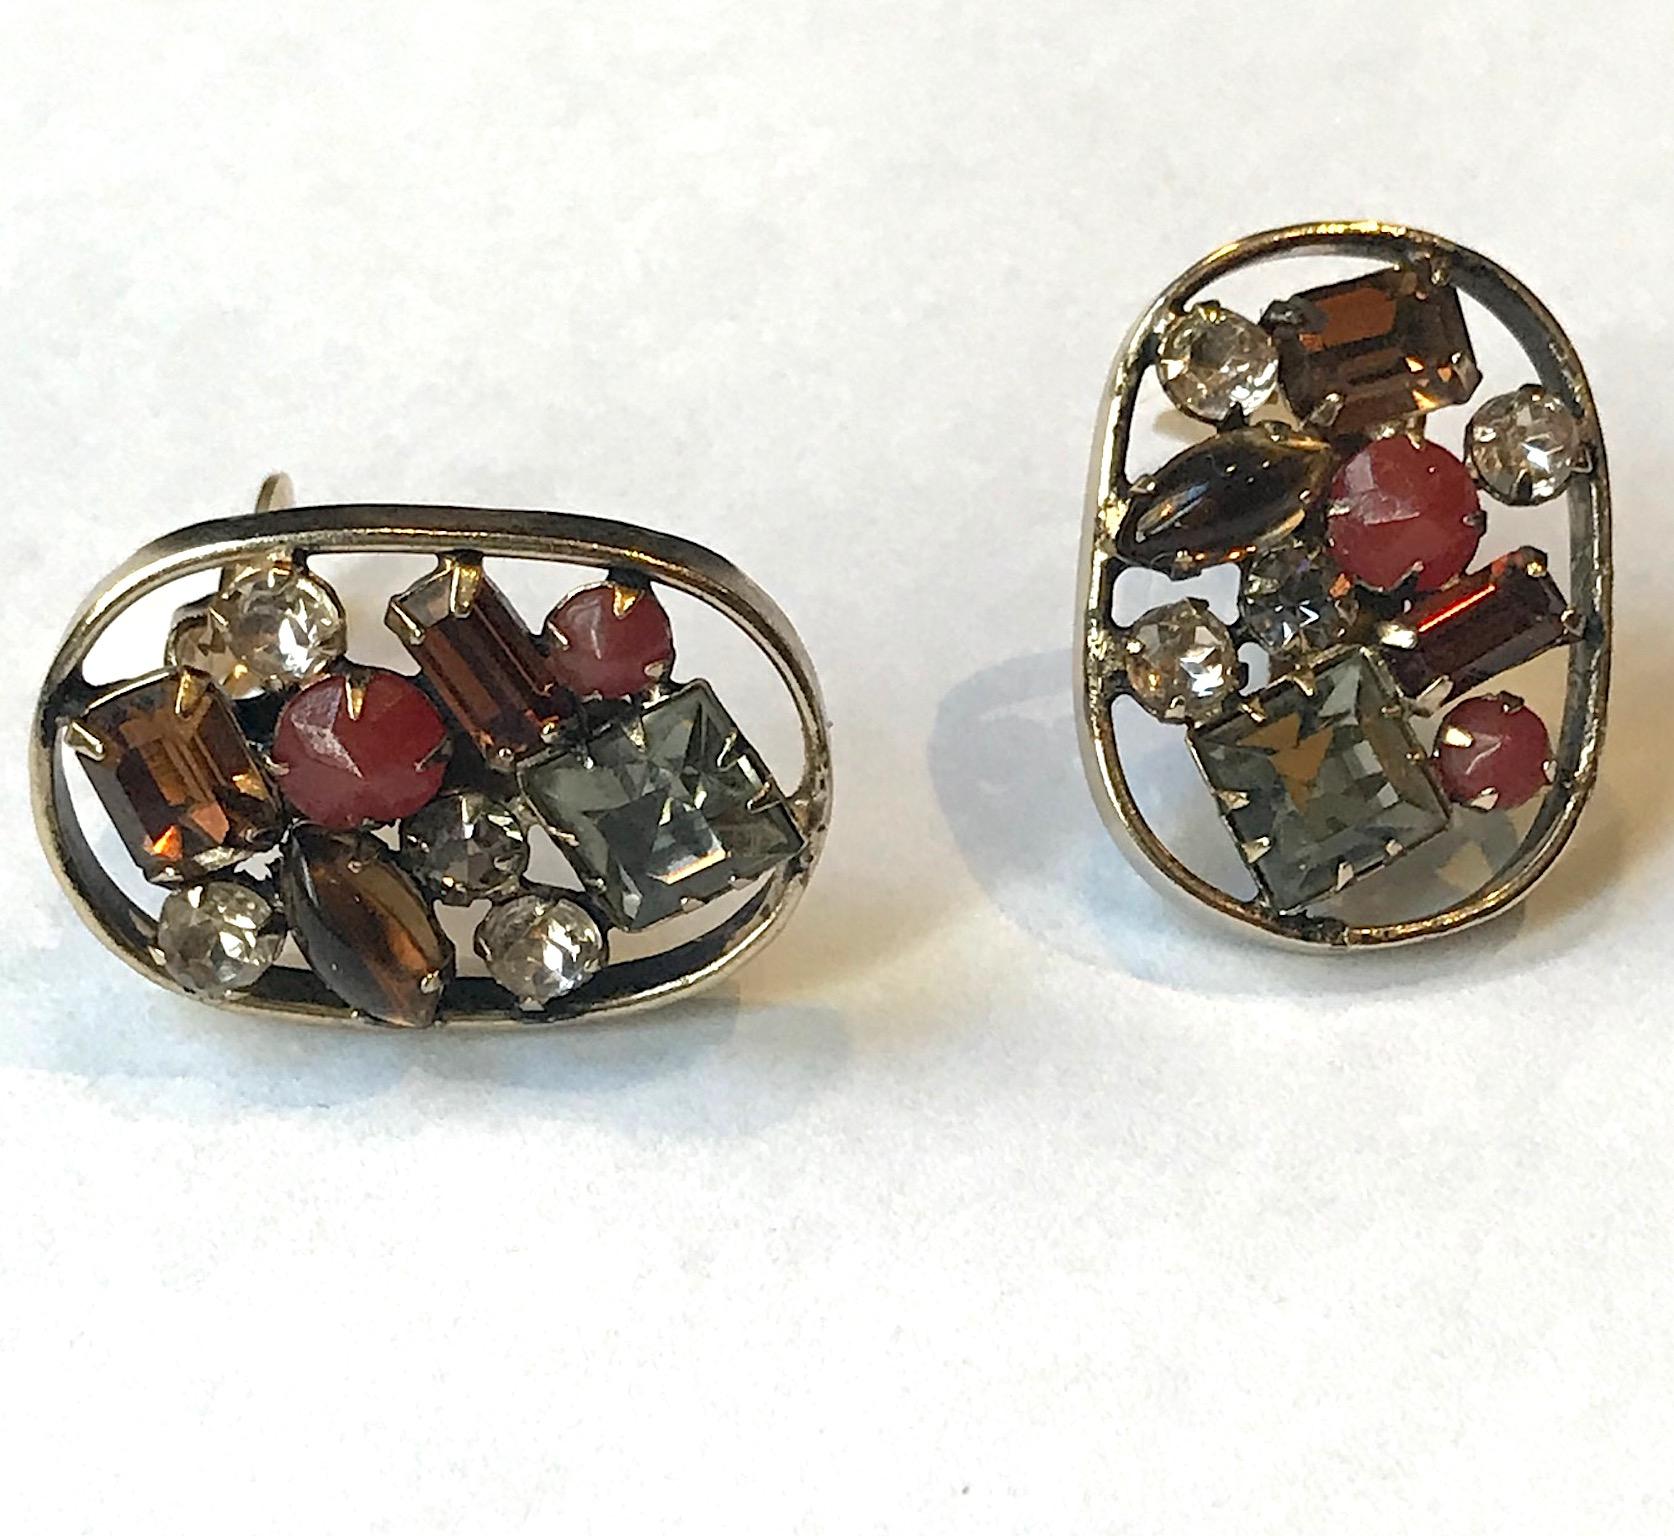 Schreiner 1950s Antique Gold and Rhinestone Earrings 2